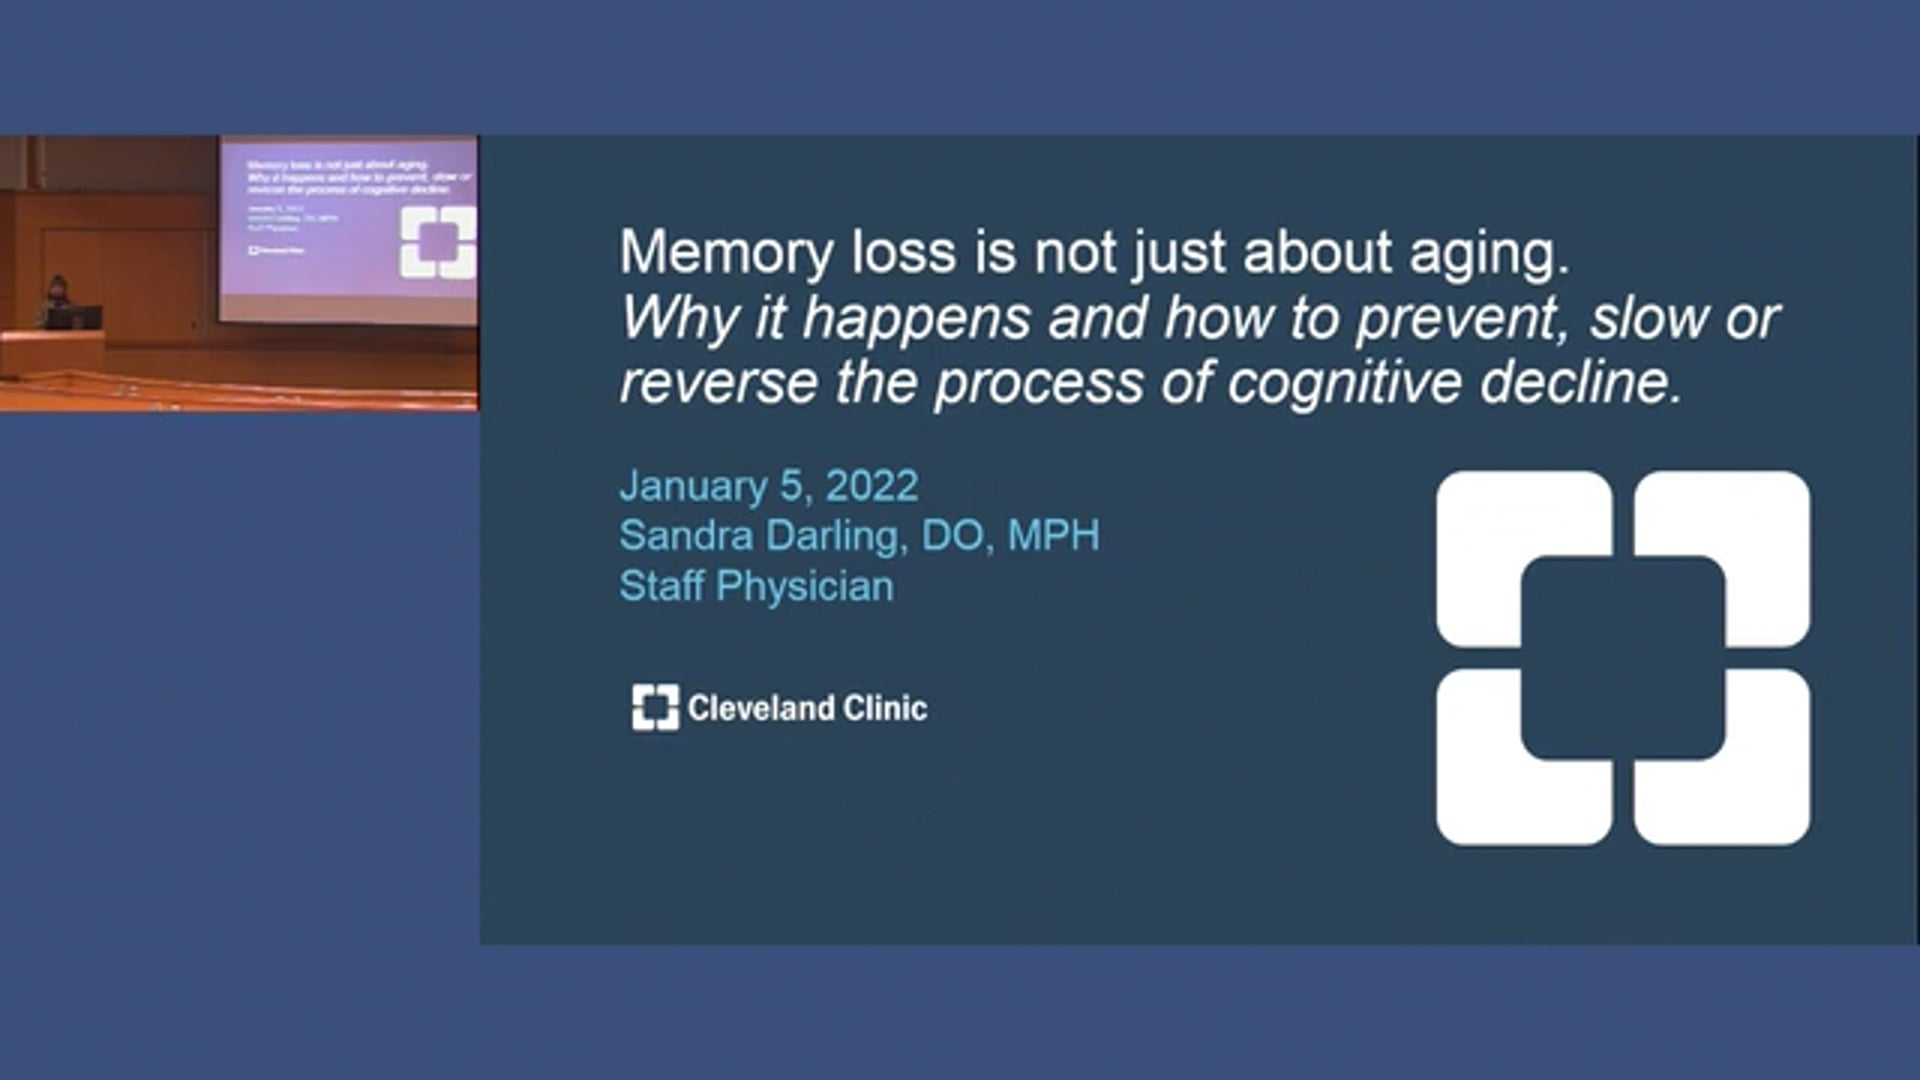 Memory loss is not just about aging. Why it happens and how to prevent, slow, or reverse the process of cognitive decline